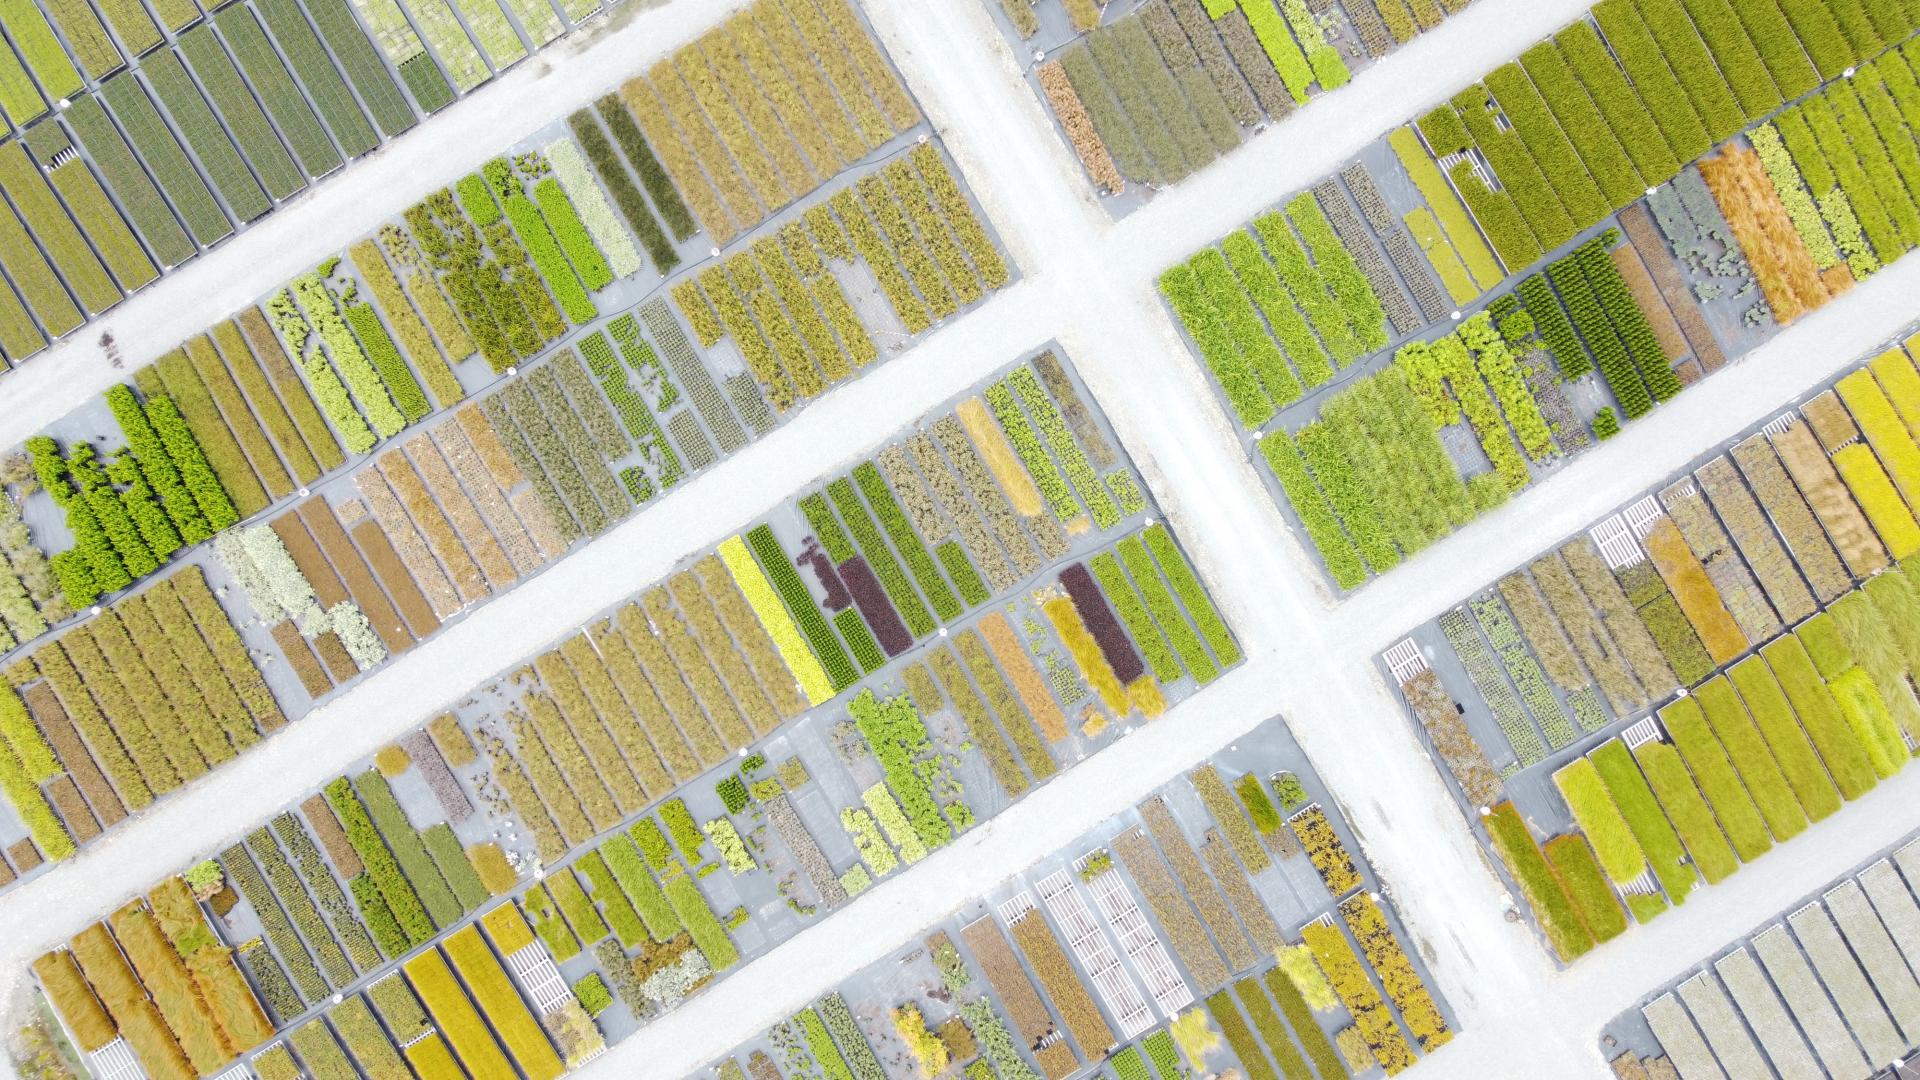 Angle drone view of greenhouse filled with plant varieties